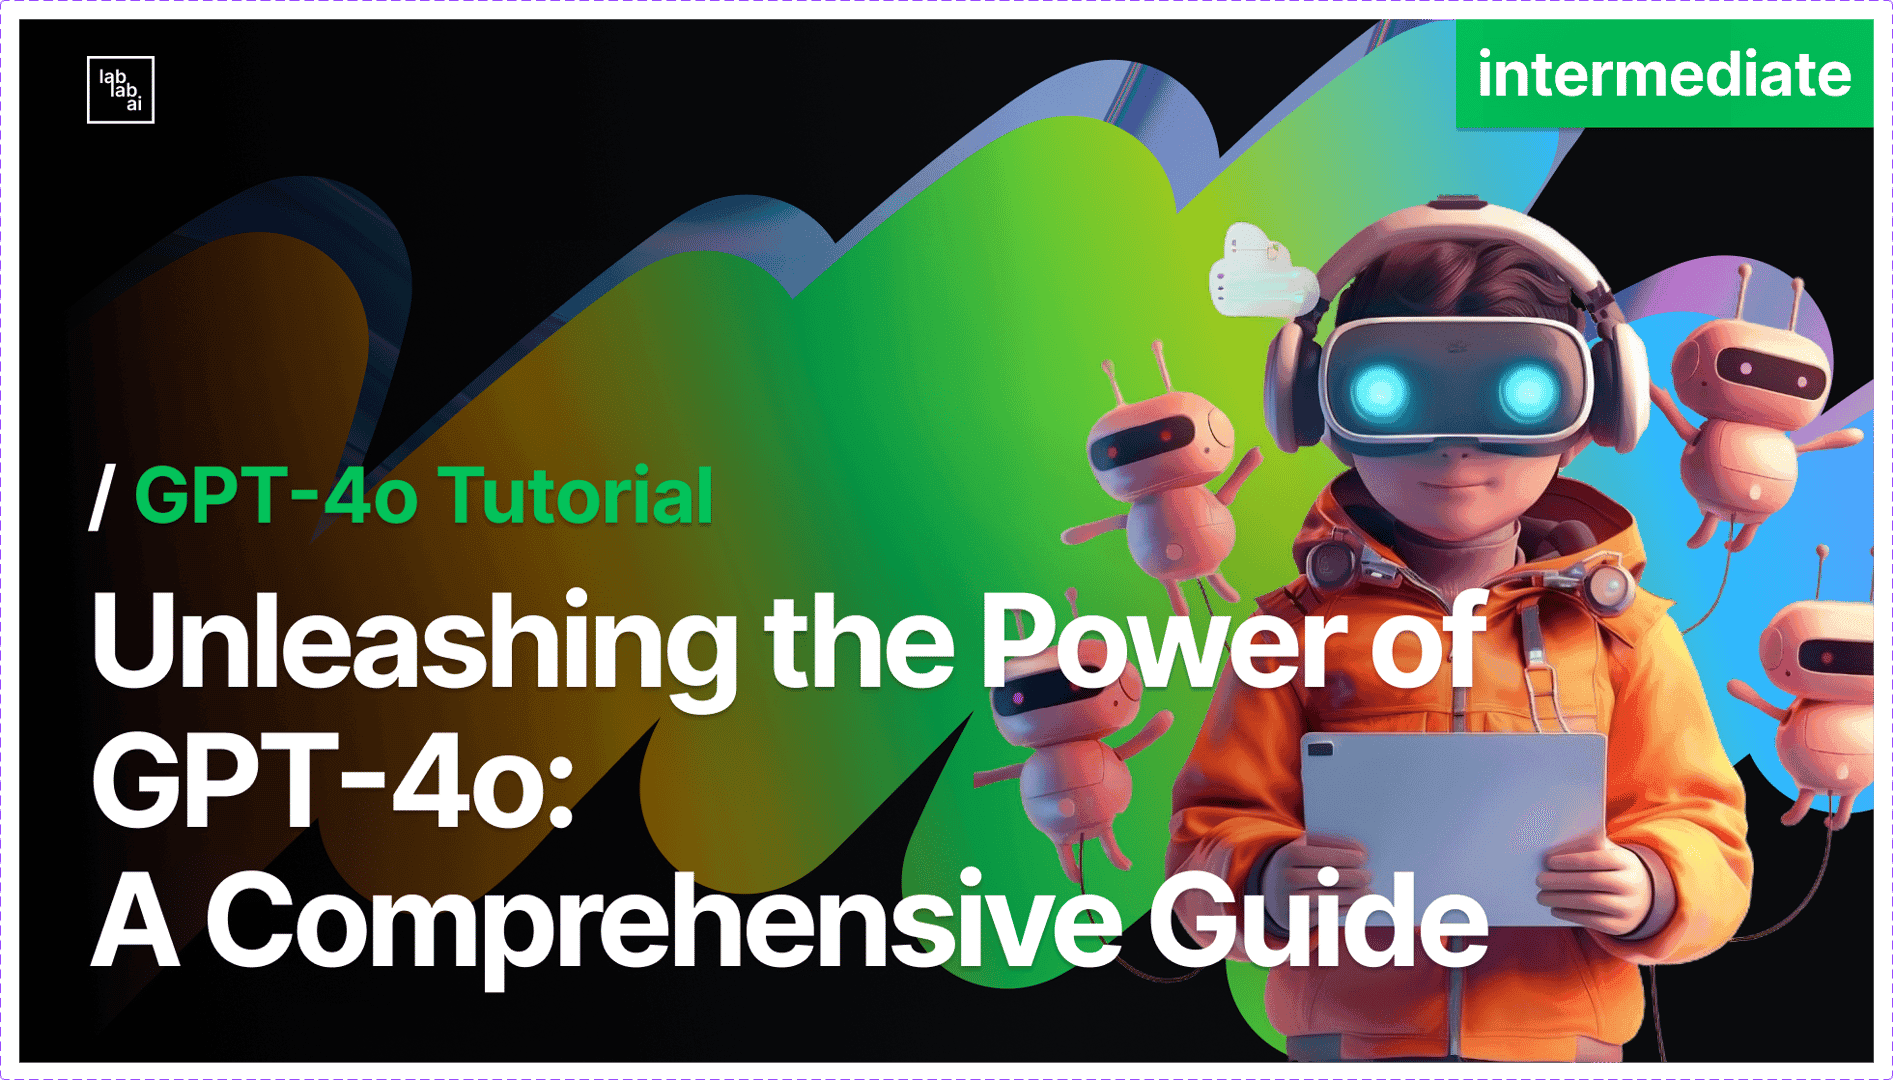 Unleashing the Power of GPT-4o: A Comprehensive Guide